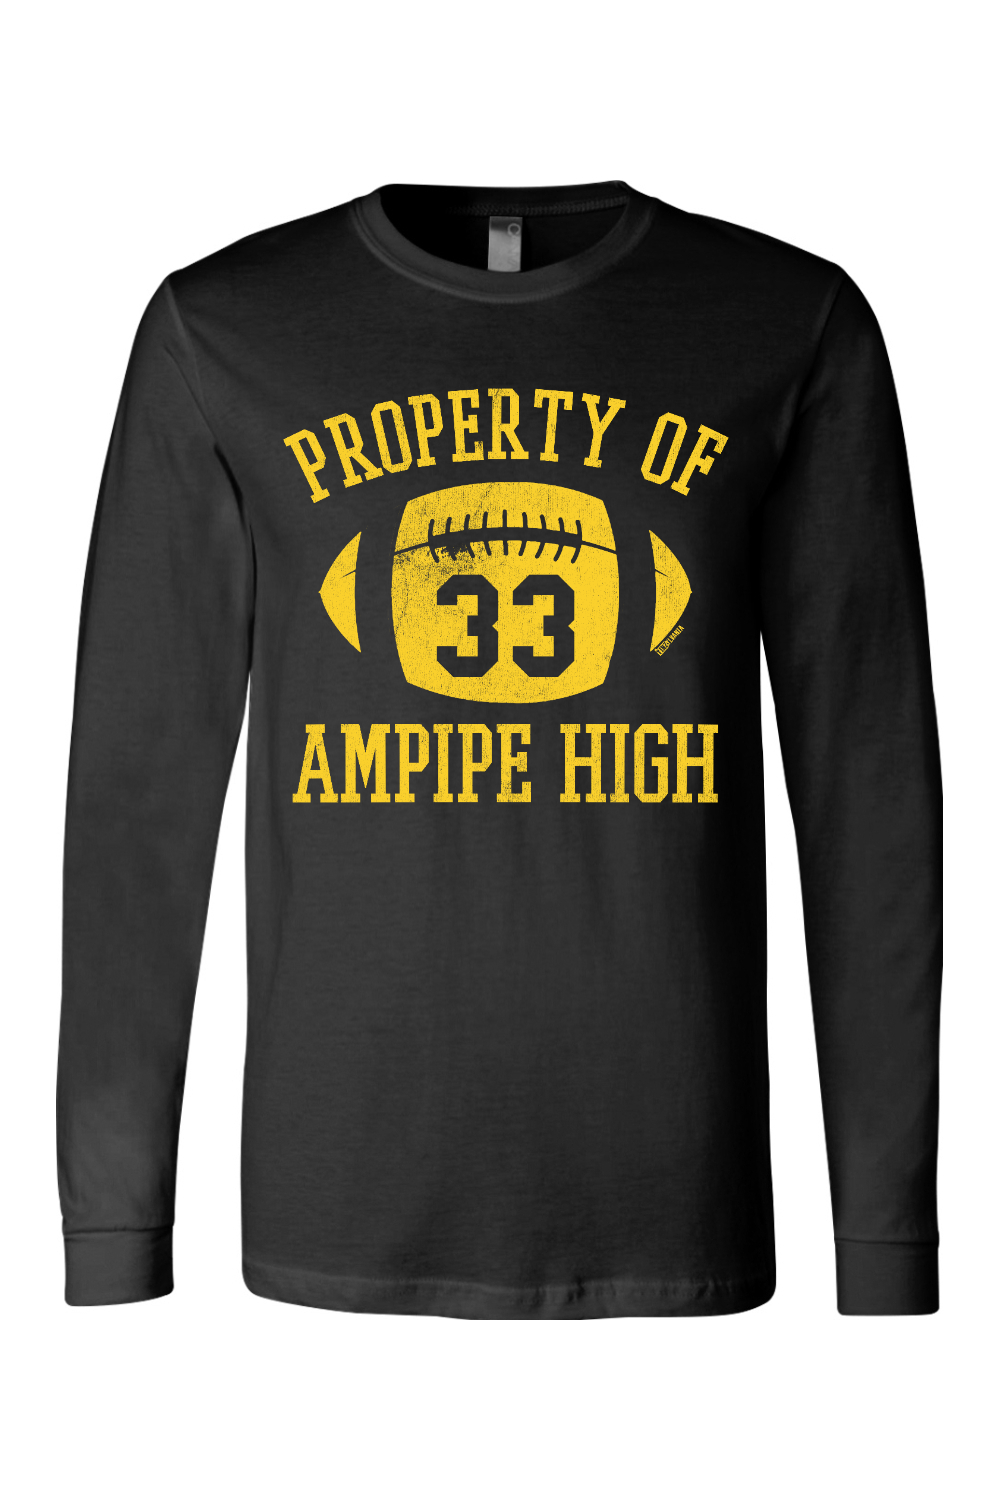 Property of Ampipe High (All the Right Moves) - Long Sleeve Tee - Yinzylvania